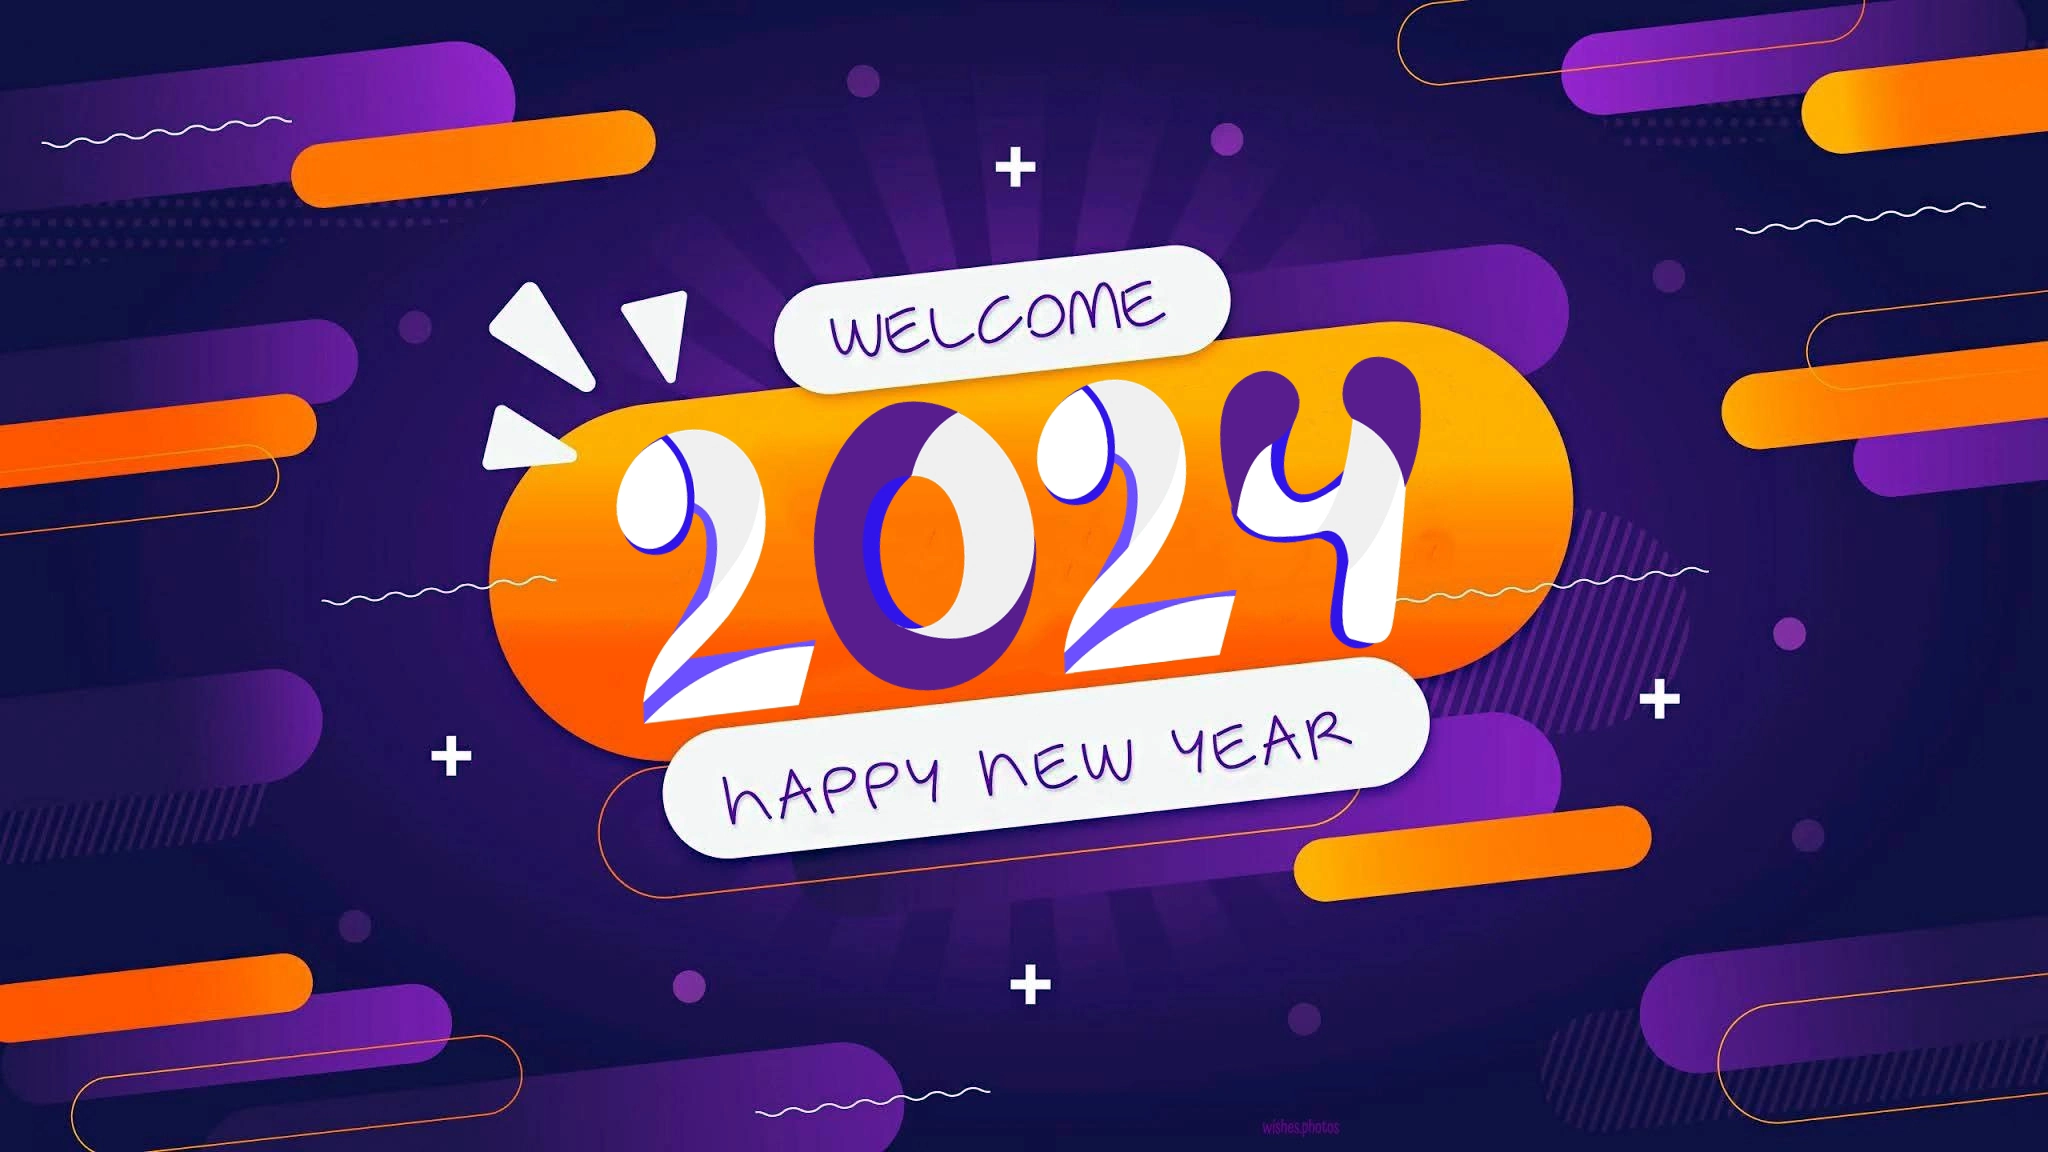 Welcome 2024 Happy New Year Wallpaper